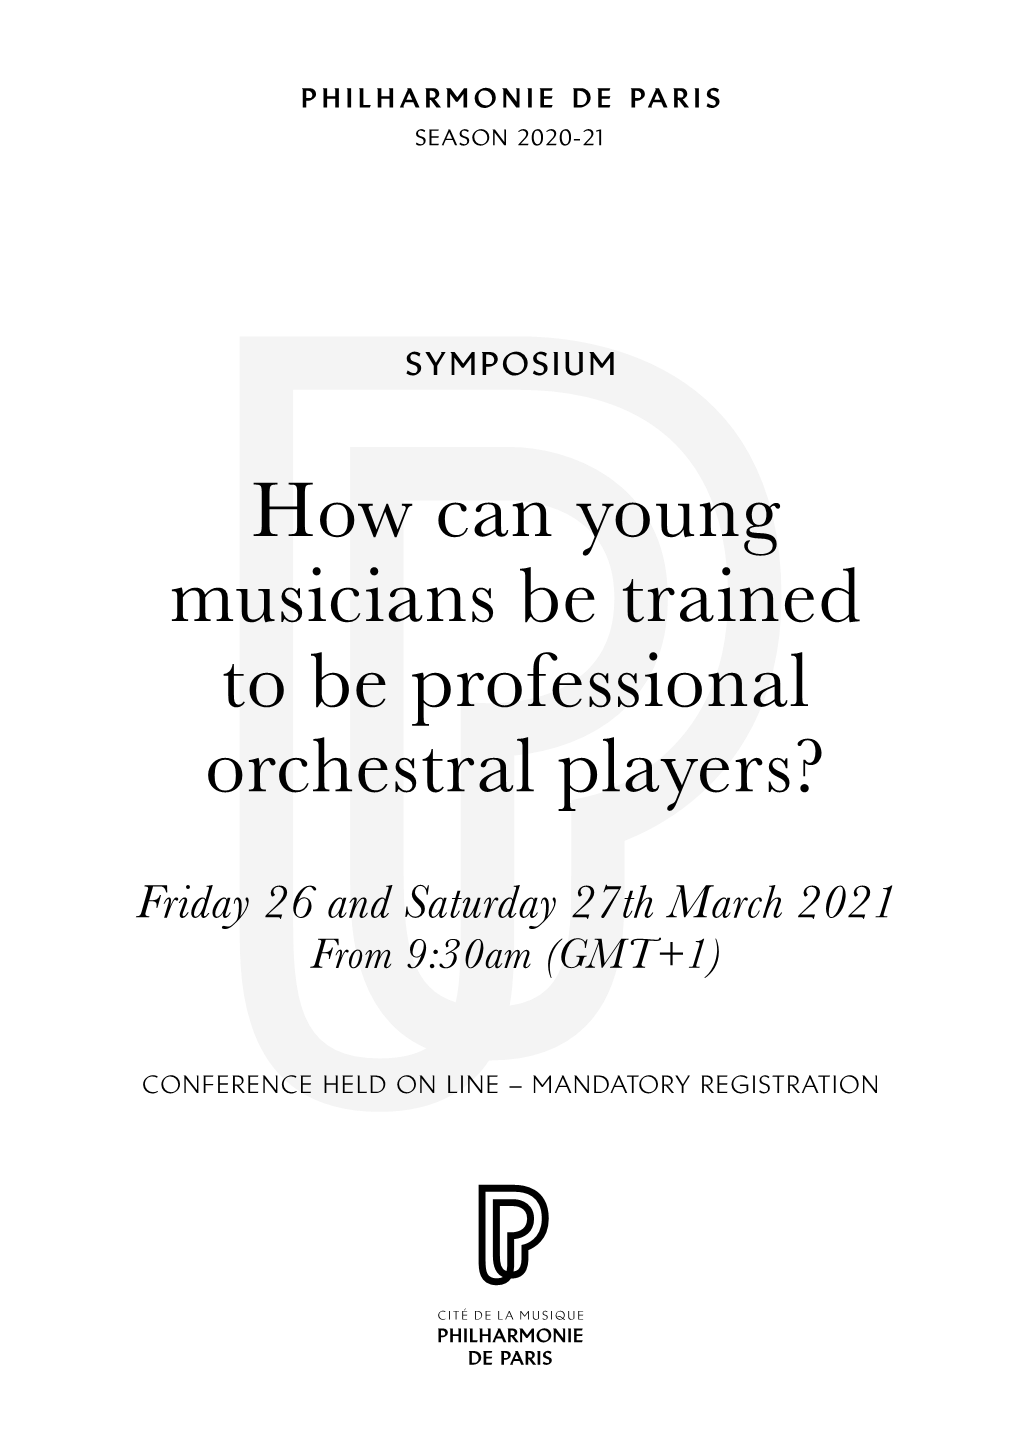 How Can Young Musicians Be Trained to Be Professional Orchestral Players?